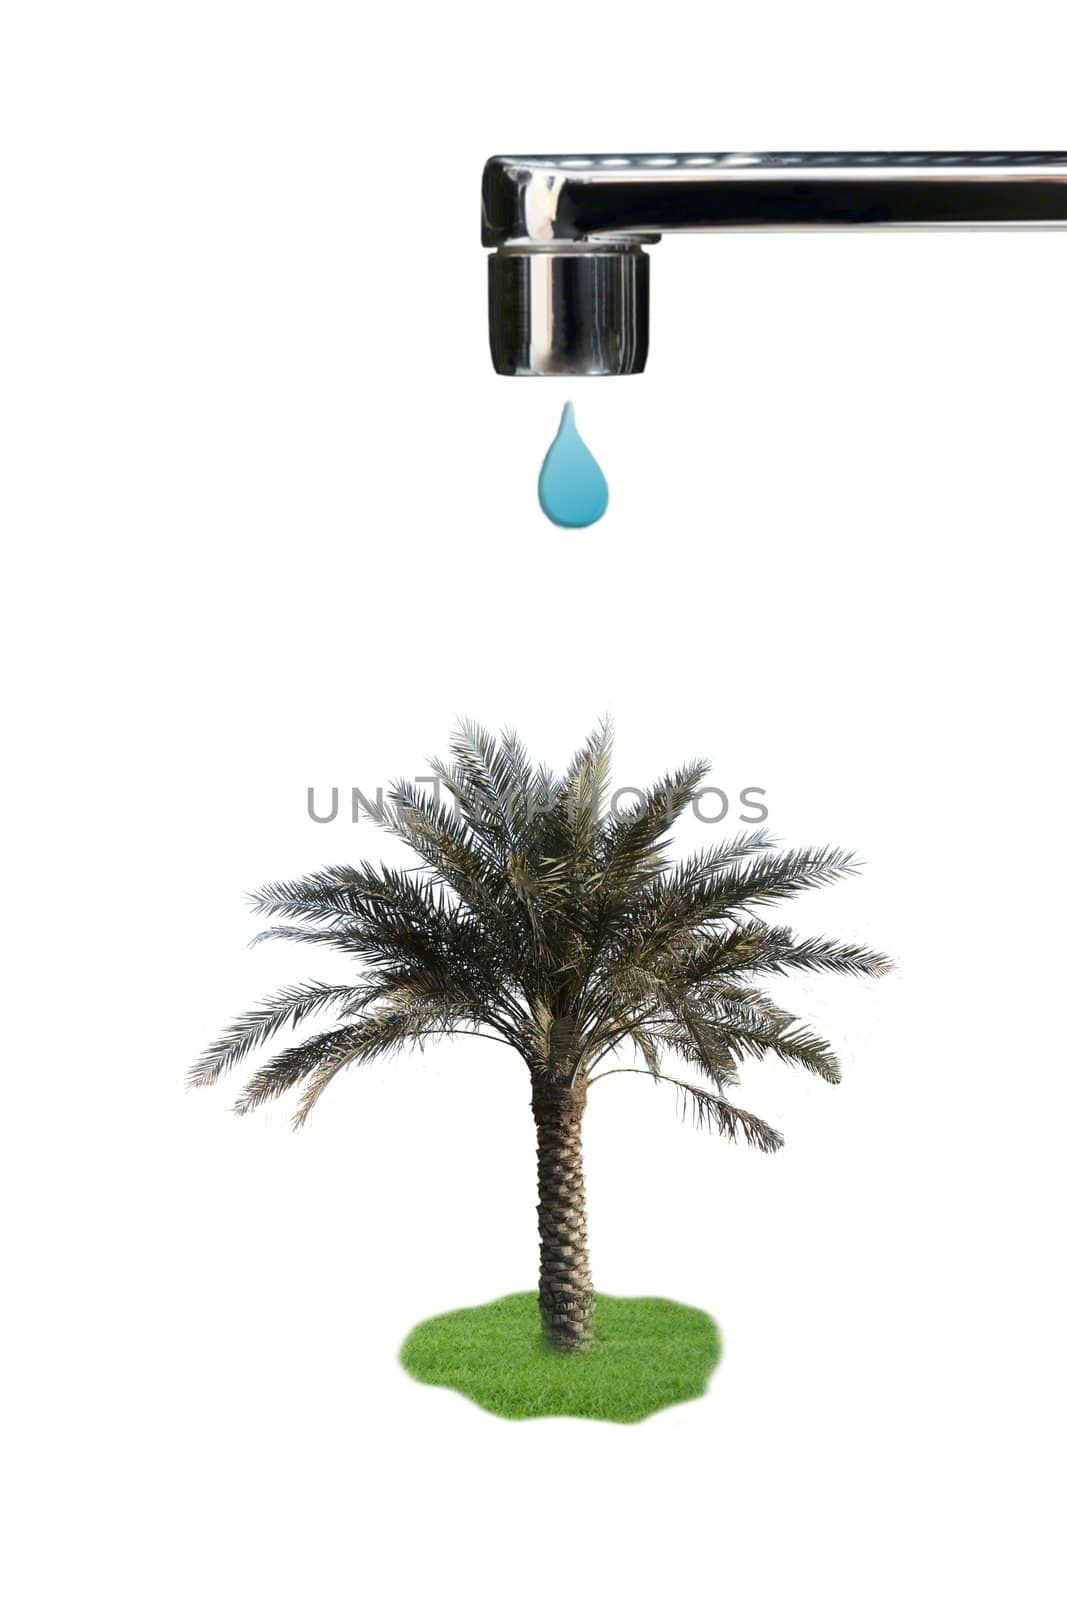 Faucet with water drop and palm tree